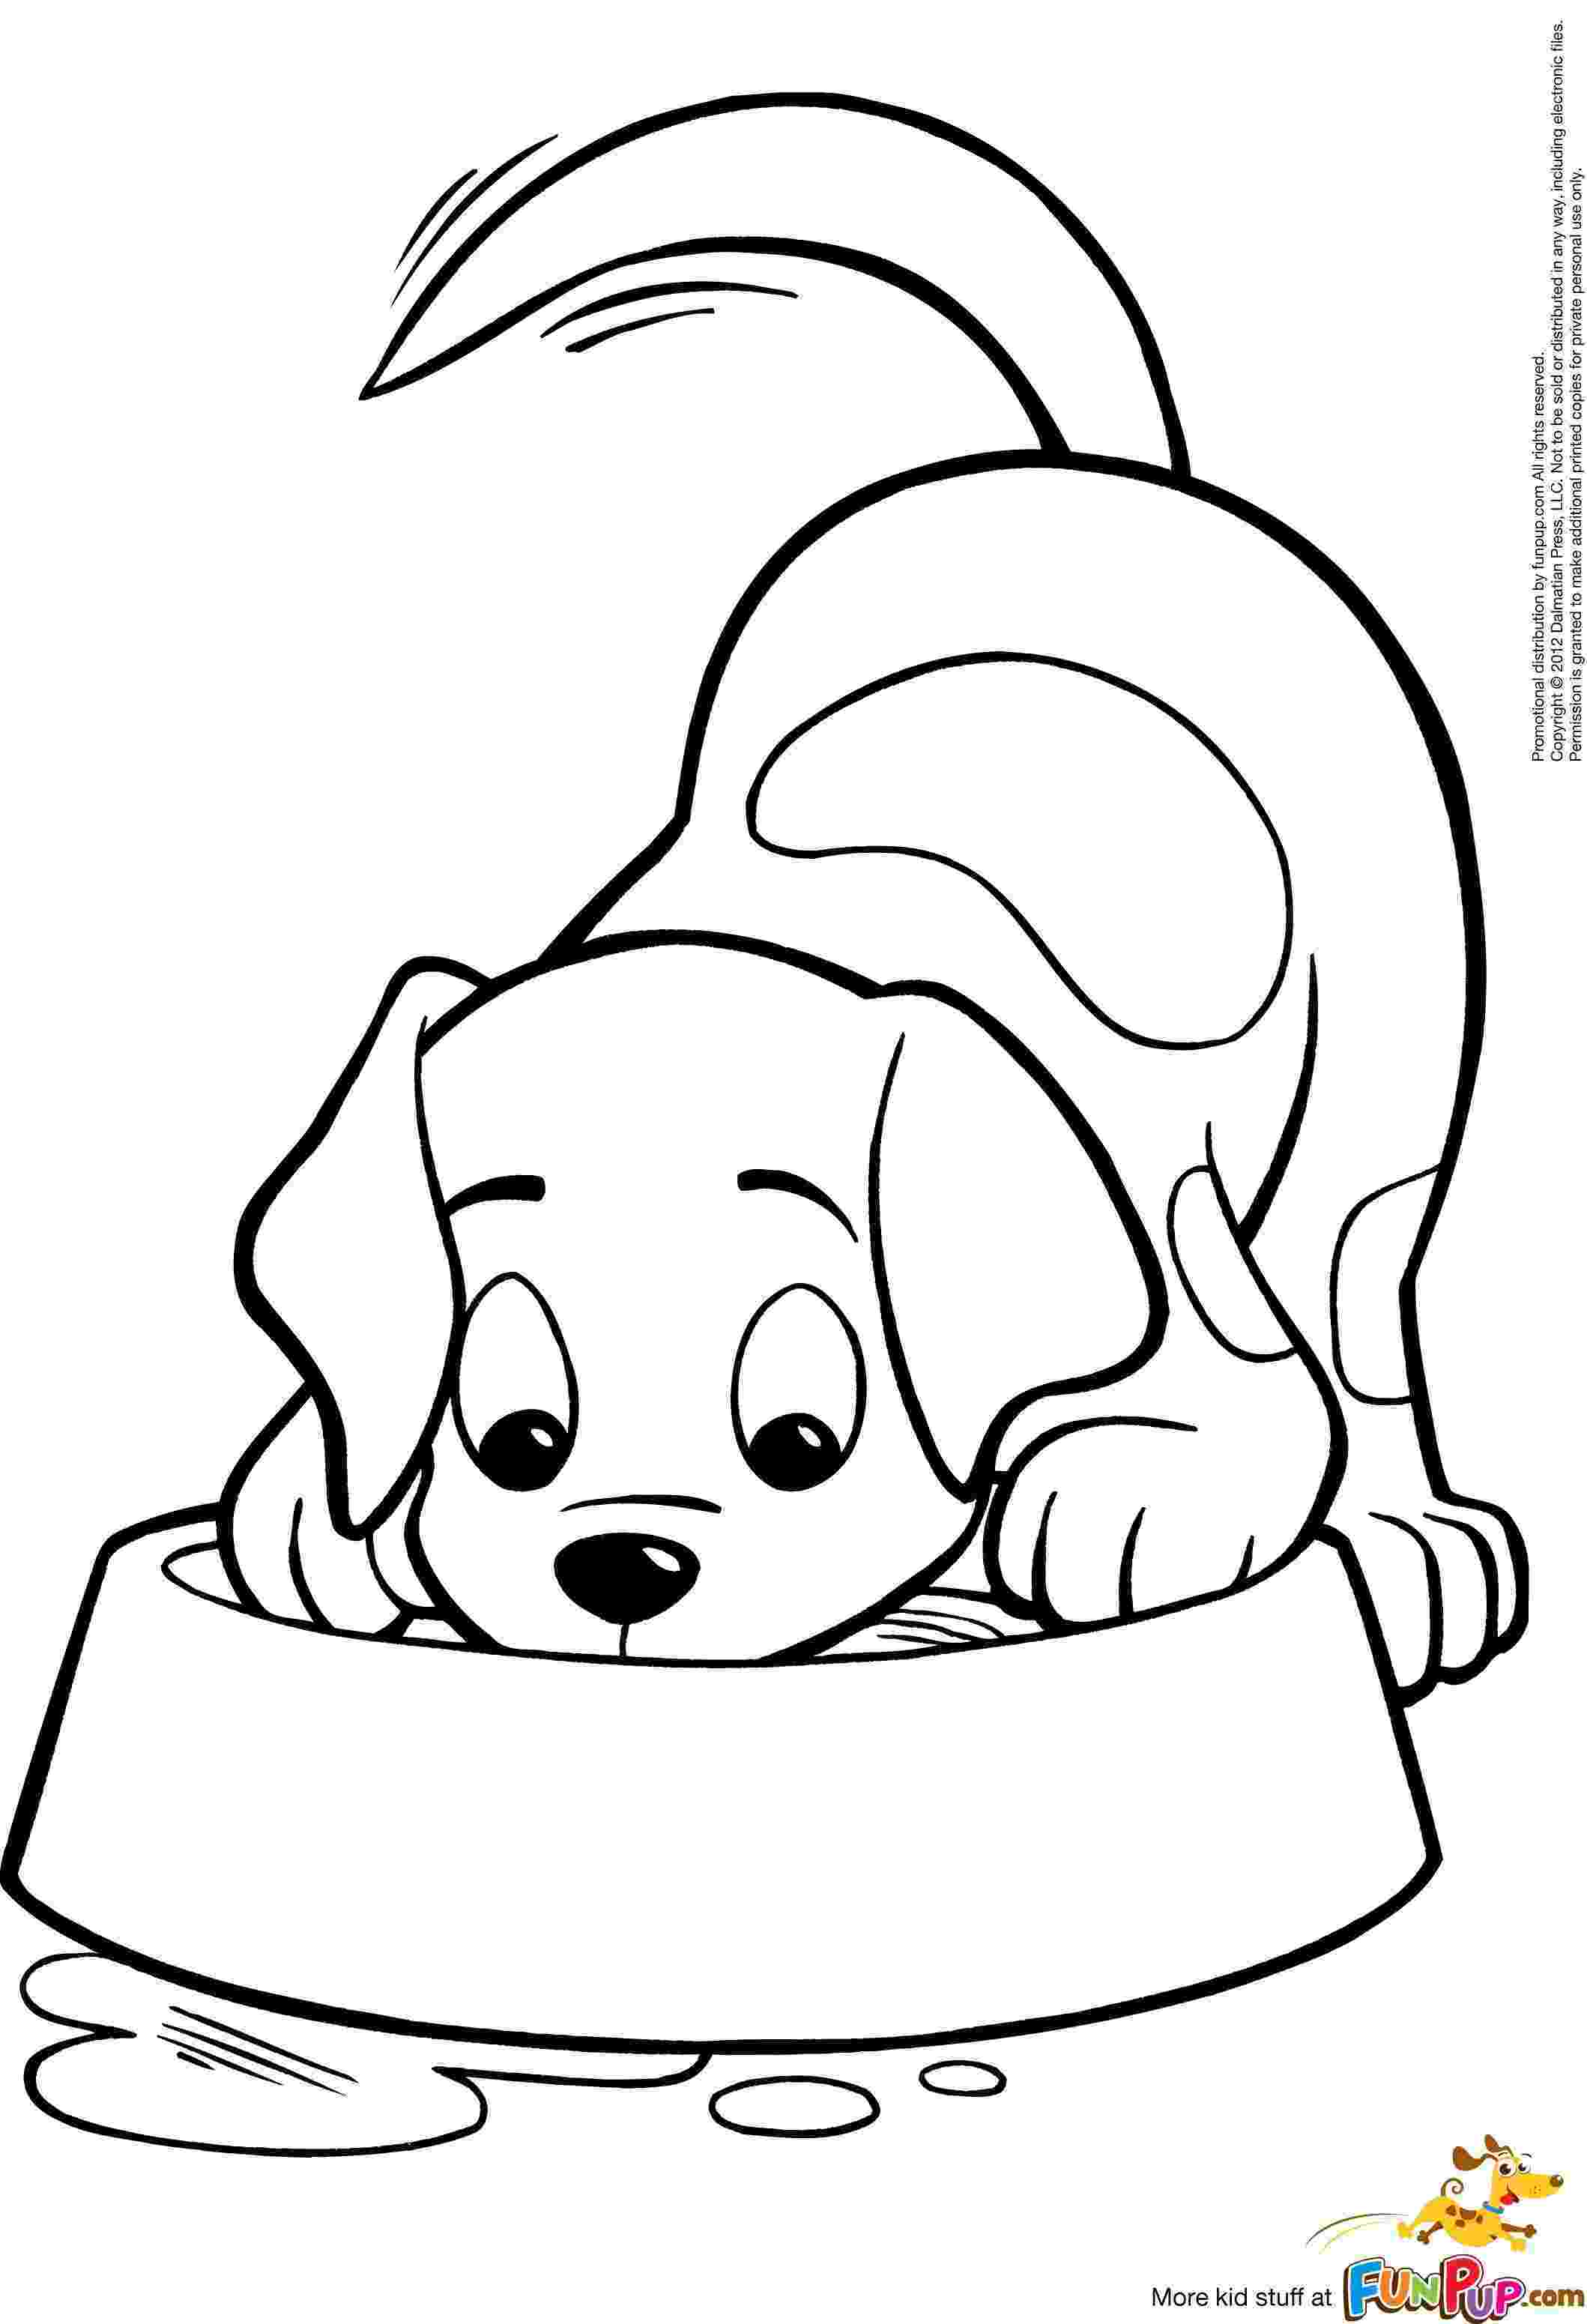 cute dog pictures to colour puppy coloring pages best coloring pages for kids colour dog cute to pictures 